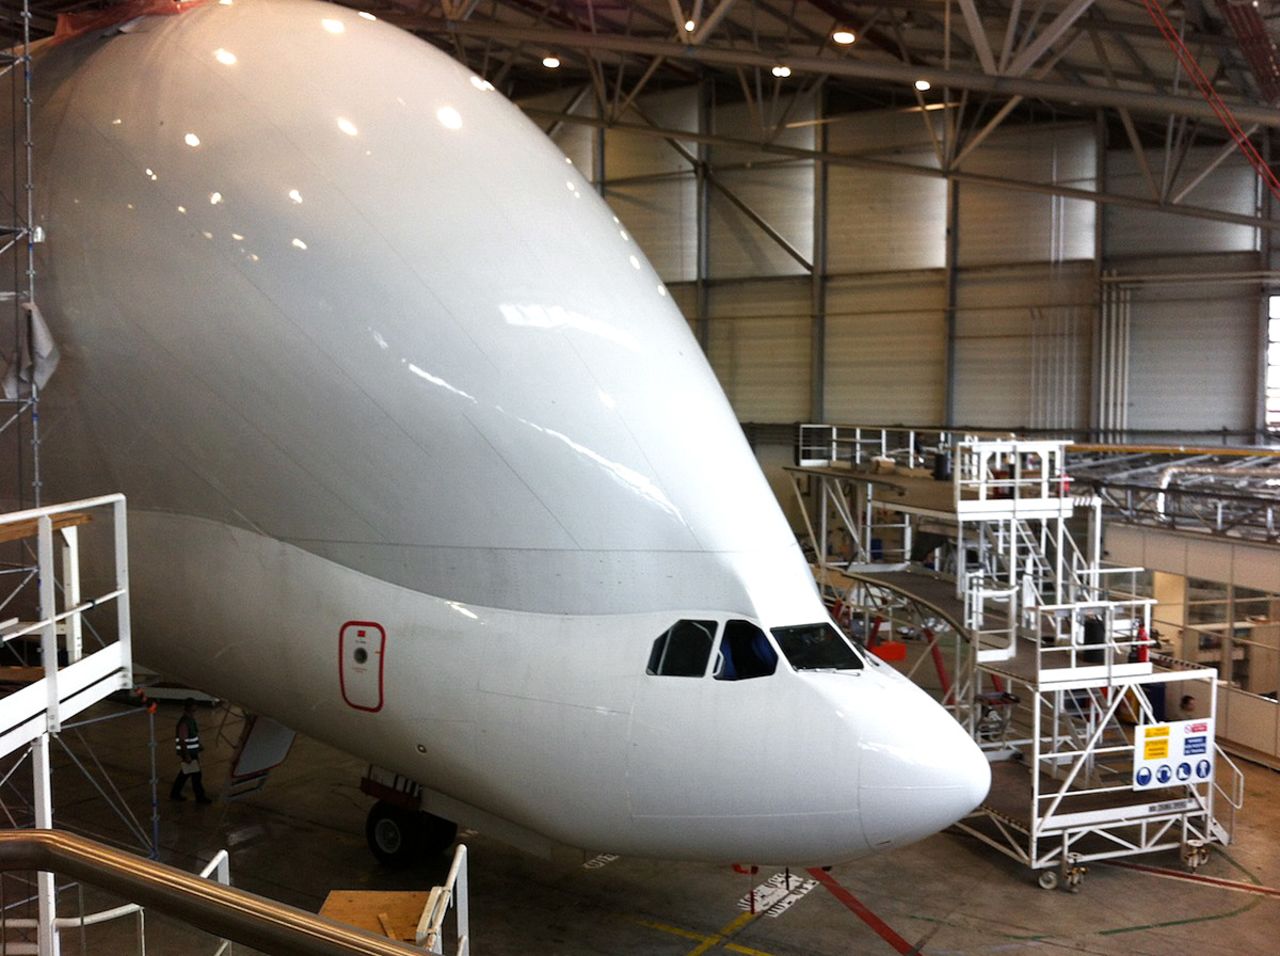 Designing the Beluga wasn't easy. The top section of an Airbus A300-600 was cut off. A wider fuselage section was added, giving the plane its characteristic hump. The cockpit was lowered, allowing cargo to be loaded through the front of the aircraft. 